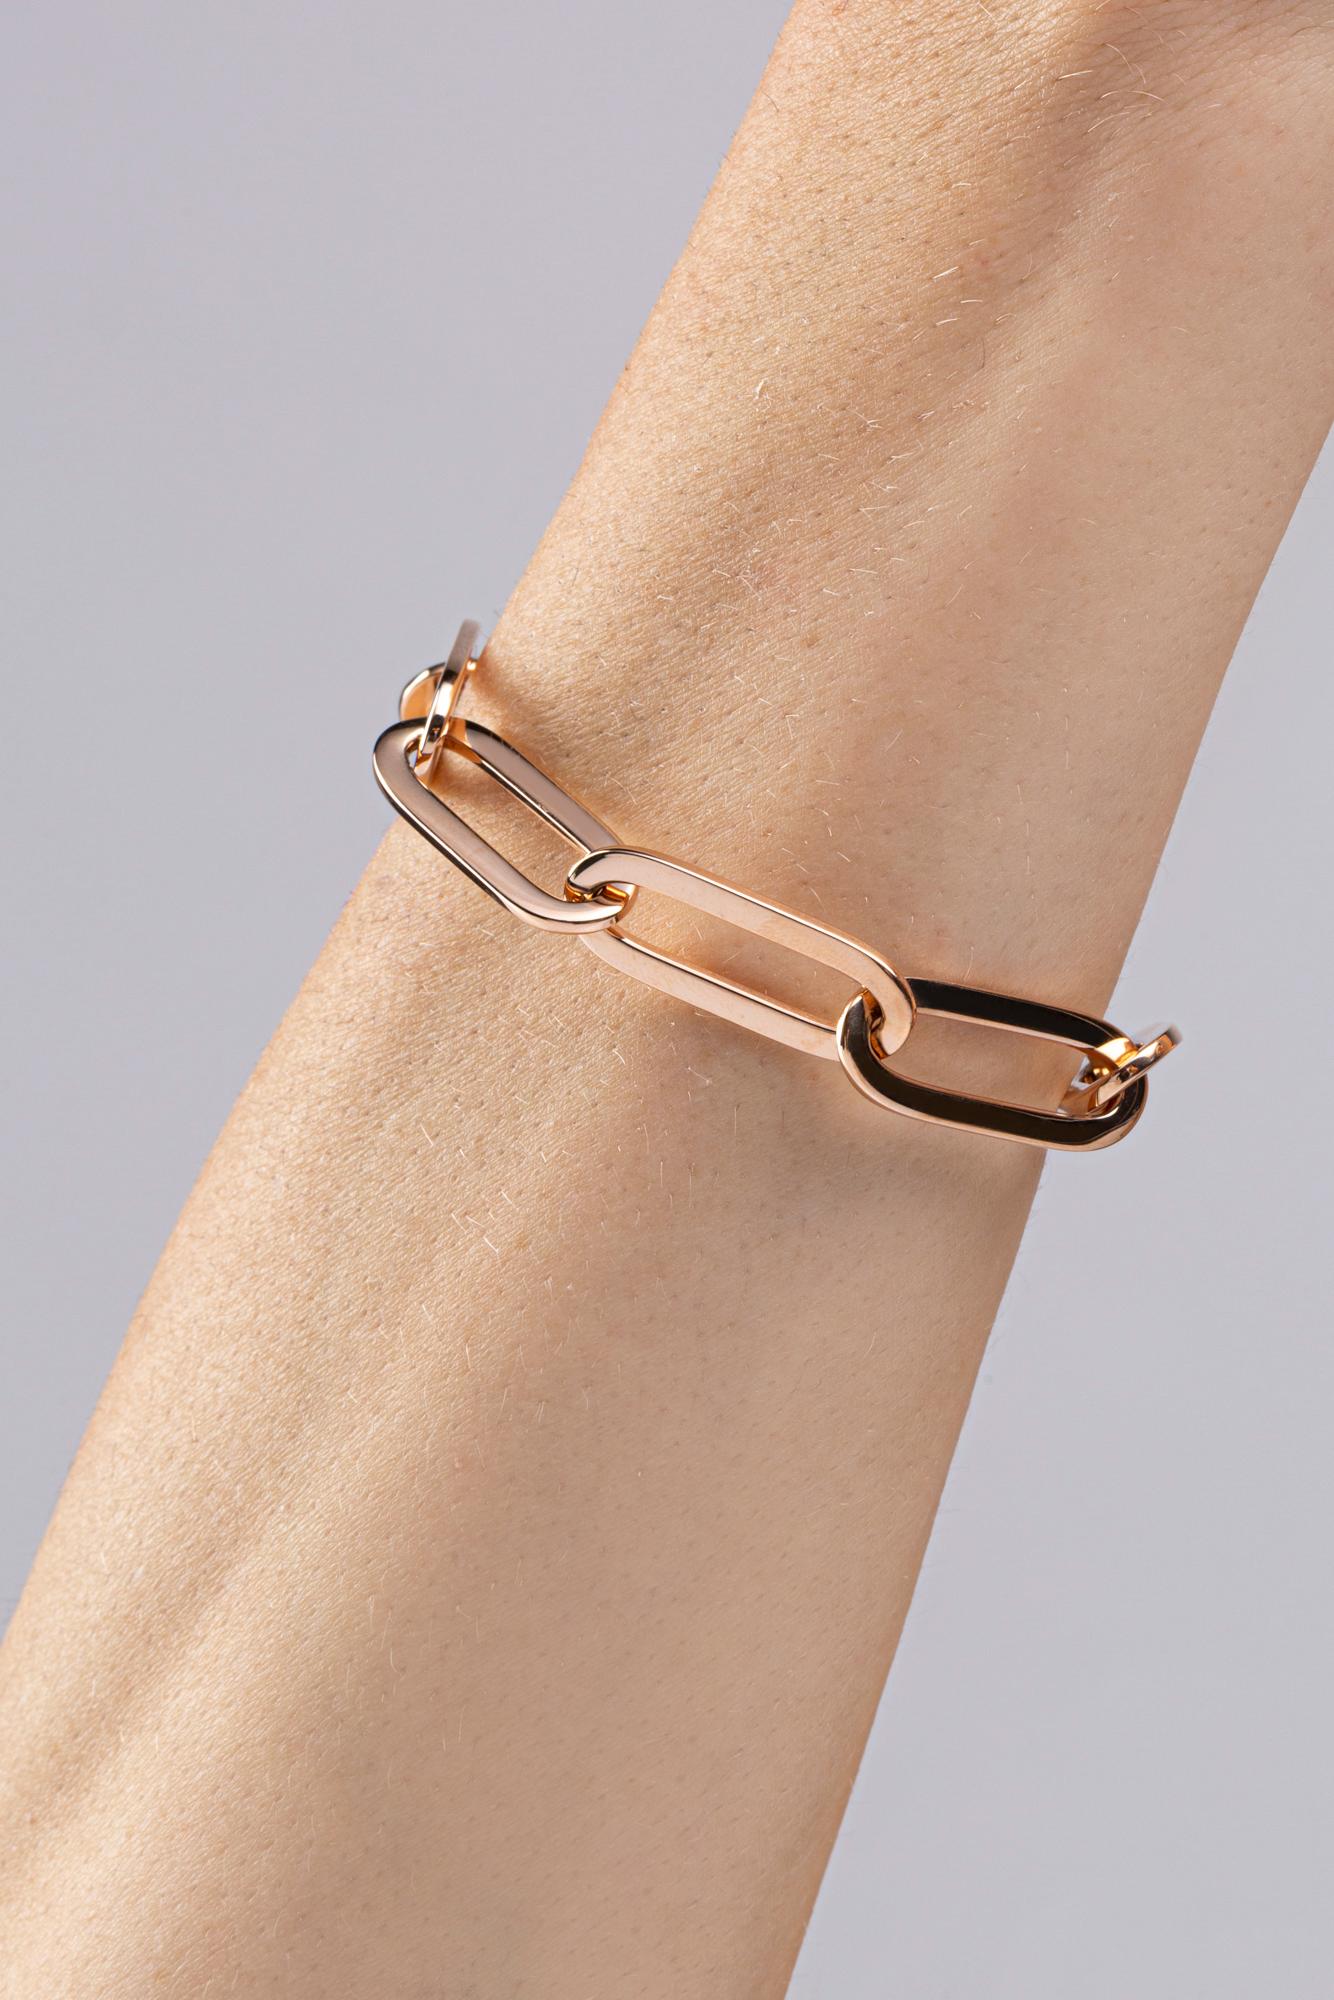 Alex Jona design collection, hand crafted in Italy, 18 karat rose gold 8.27 in. long chain bracelet.

Alex Jona jewels stand out, not only for their special design and for the excellent quality of the gemstones, but also for the careful attention